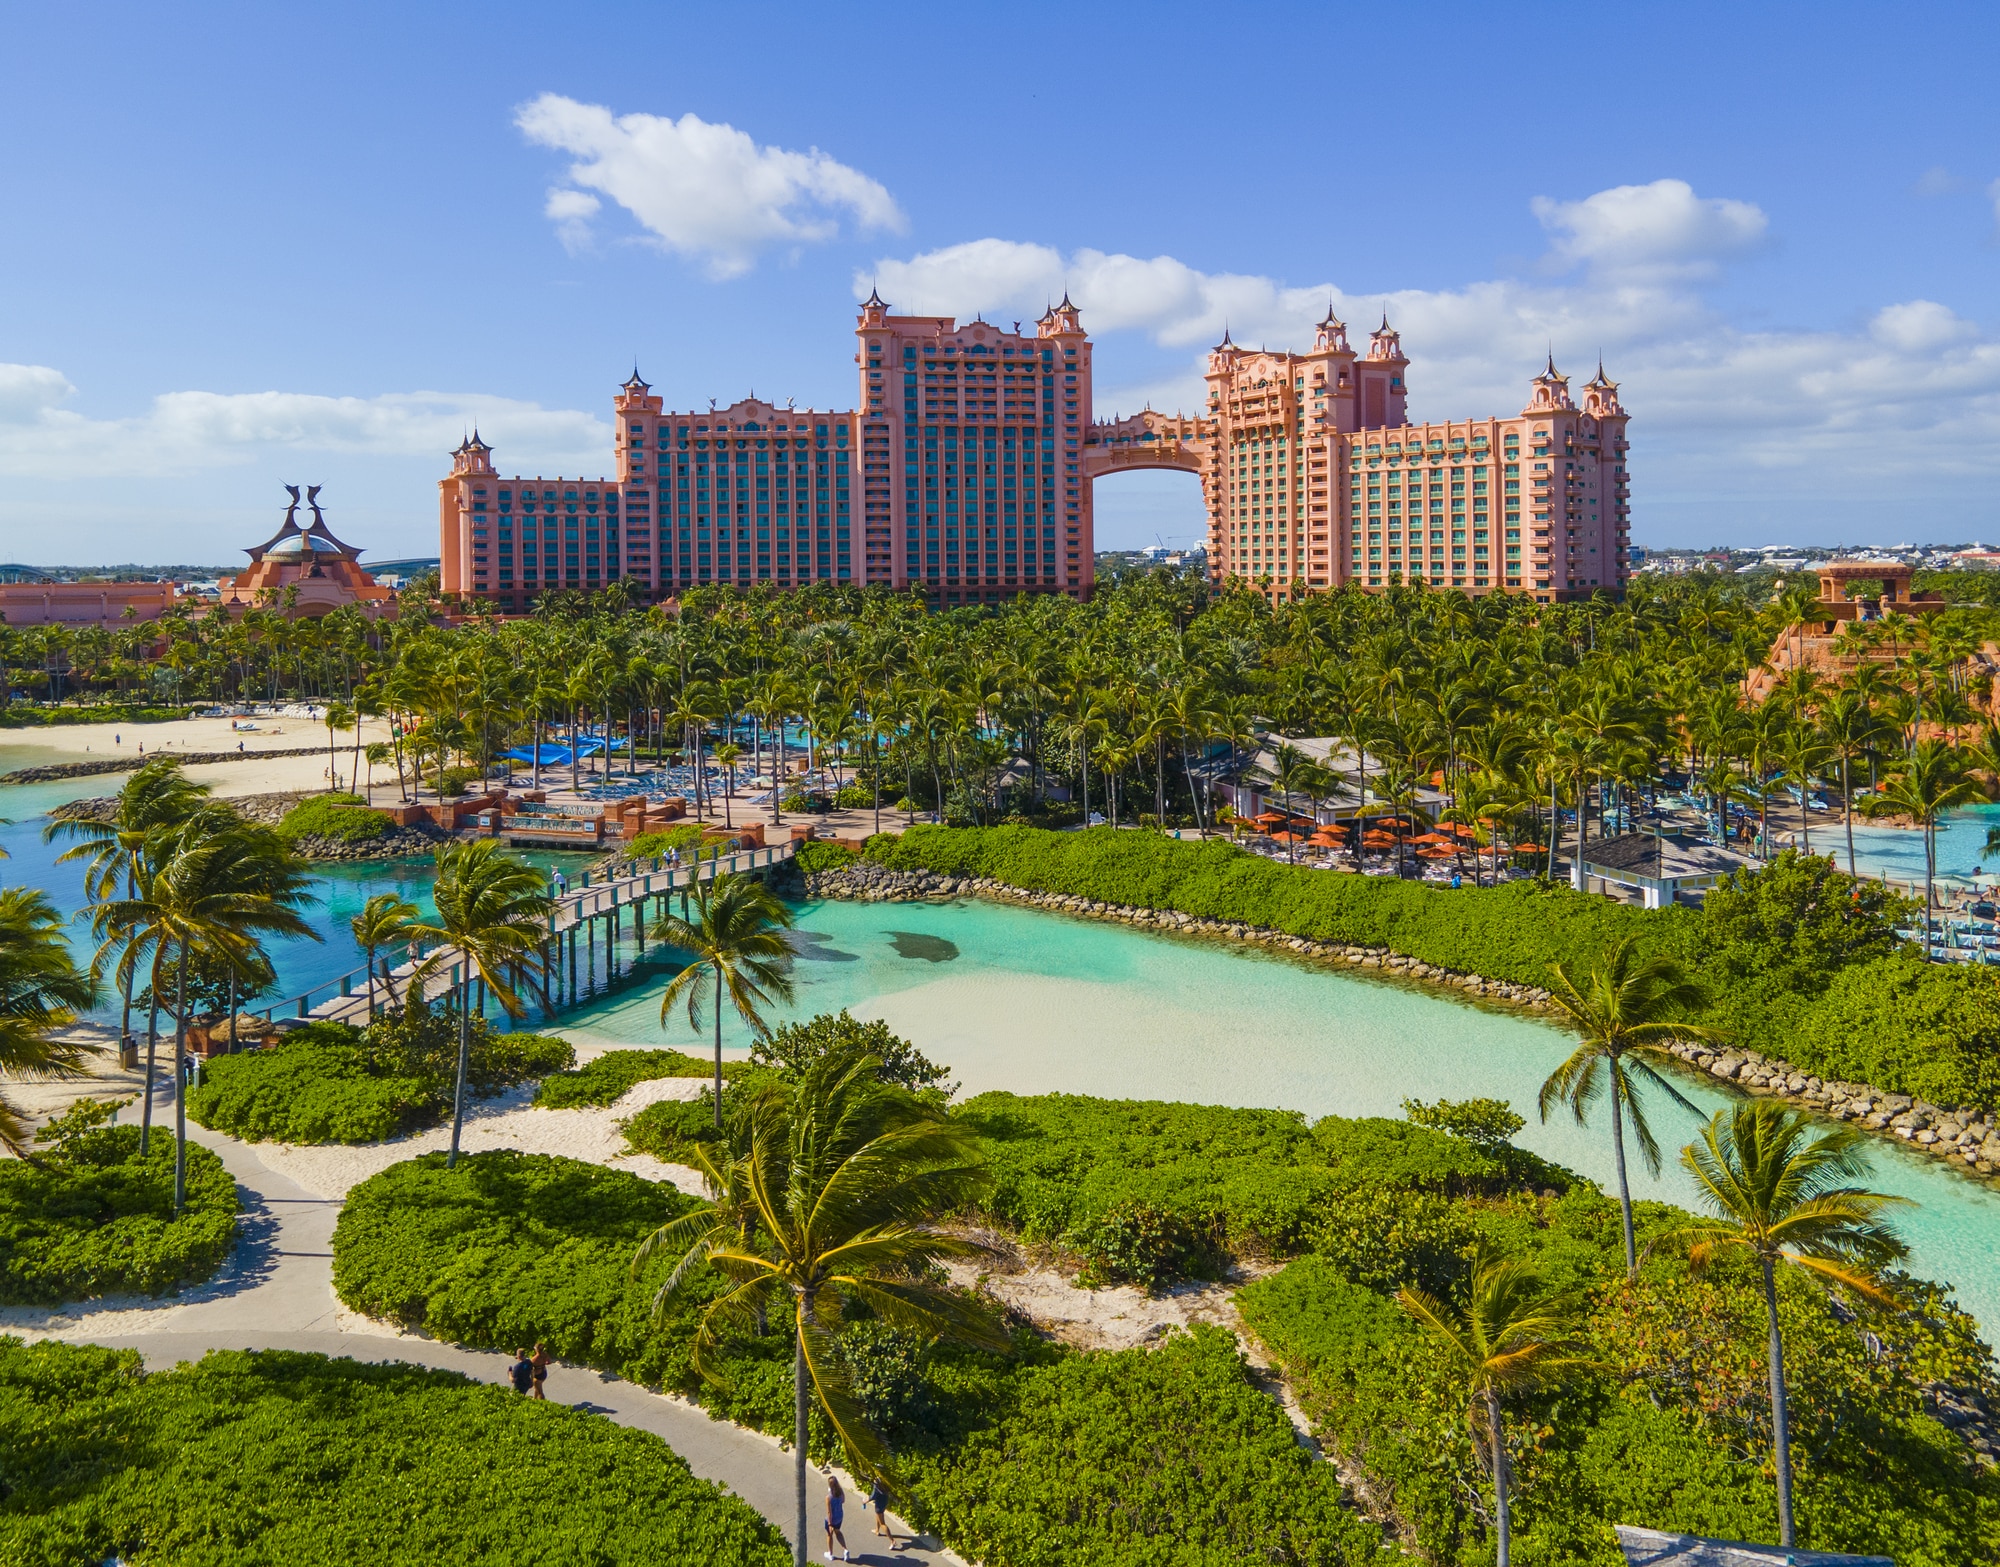 Paradise Island Bahamas Is Easy to Get to From the East Coast and